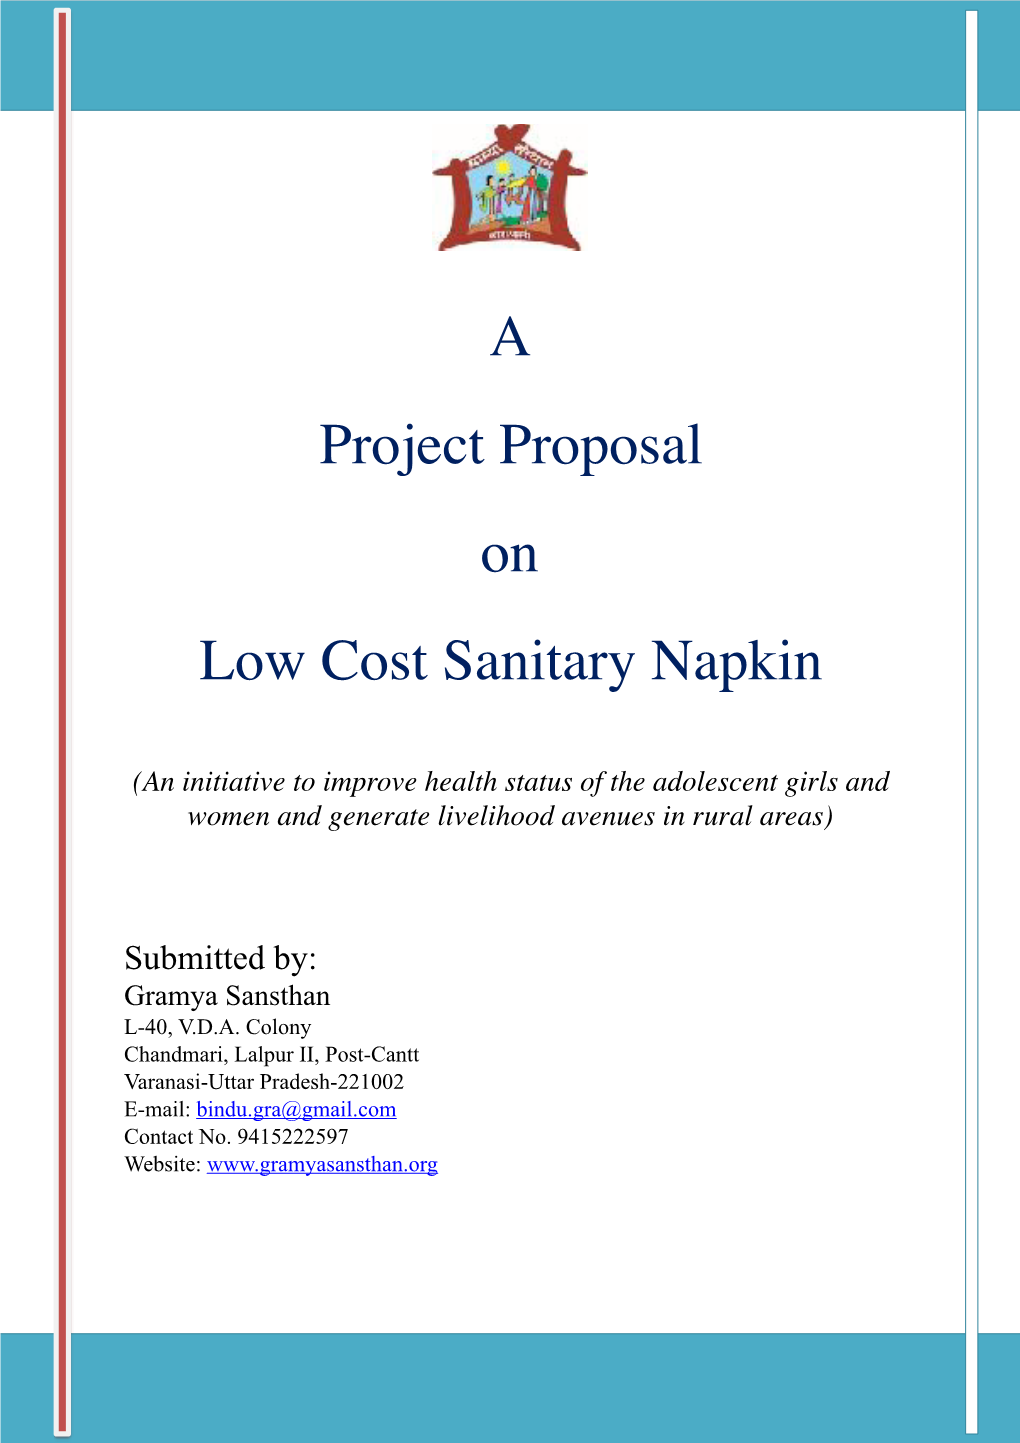 A Project Proposal on Low Cost Sanitary Napkin